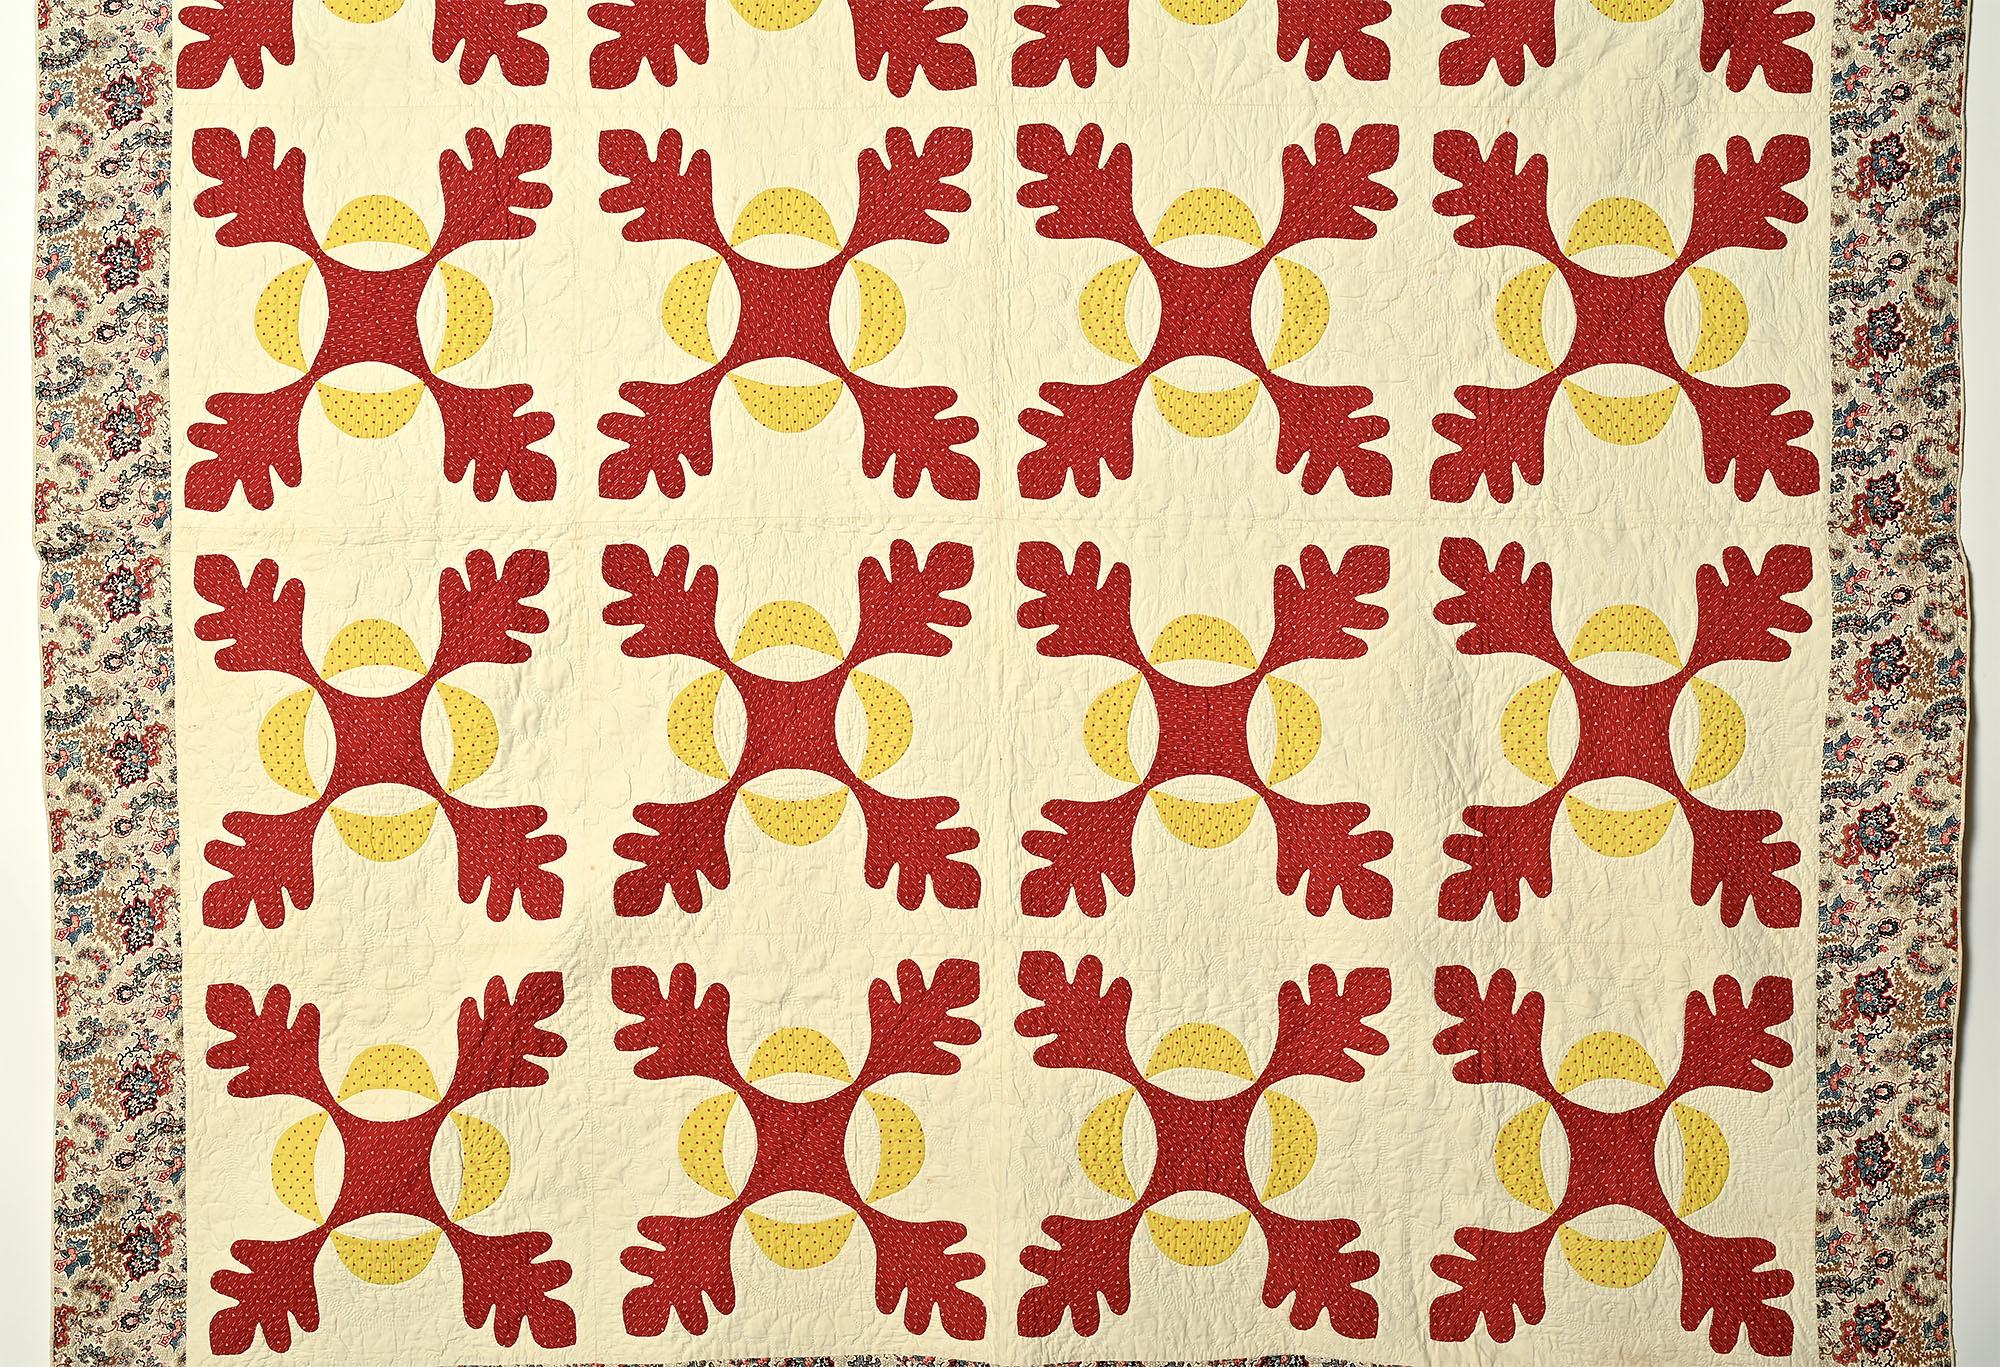 This is a beautifully made version of a tradtional Oakleaf patern quilt. The rust (or brick) color appears to come forward while the yellow recedes. The border is a paisley and floral print that blends perfectly with the interior. The white areas